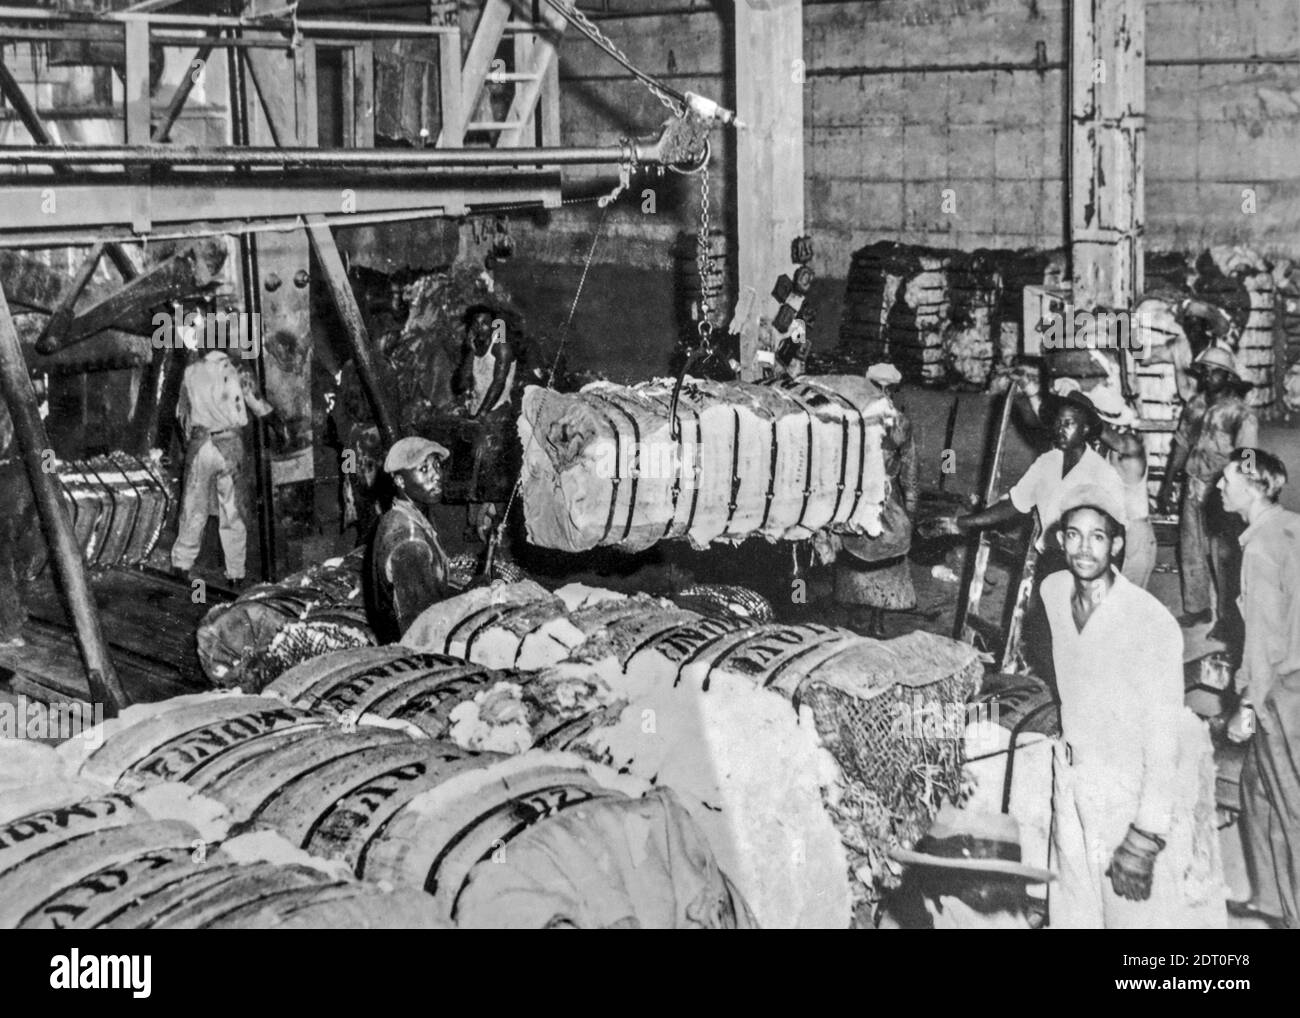 1940 black and white archival photo showing Black Afro-American labourers / workers preparing heavy bales of cotton for transport per ship, Texas, US Stock Photo